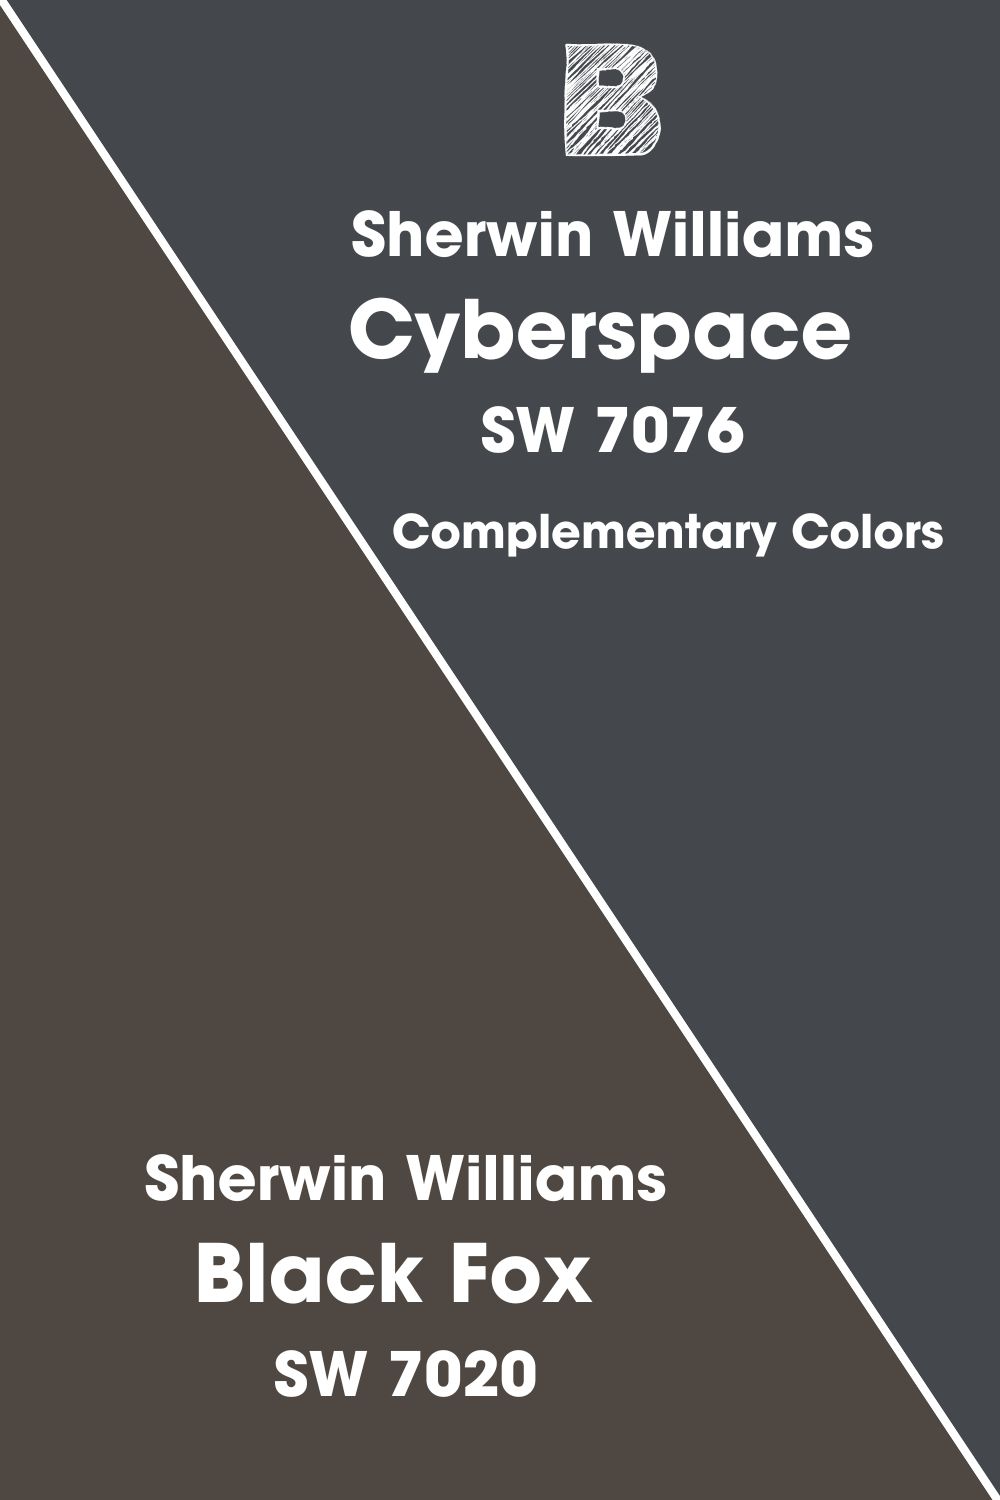 Sherwin Williams Cyberspace Complementary Colors